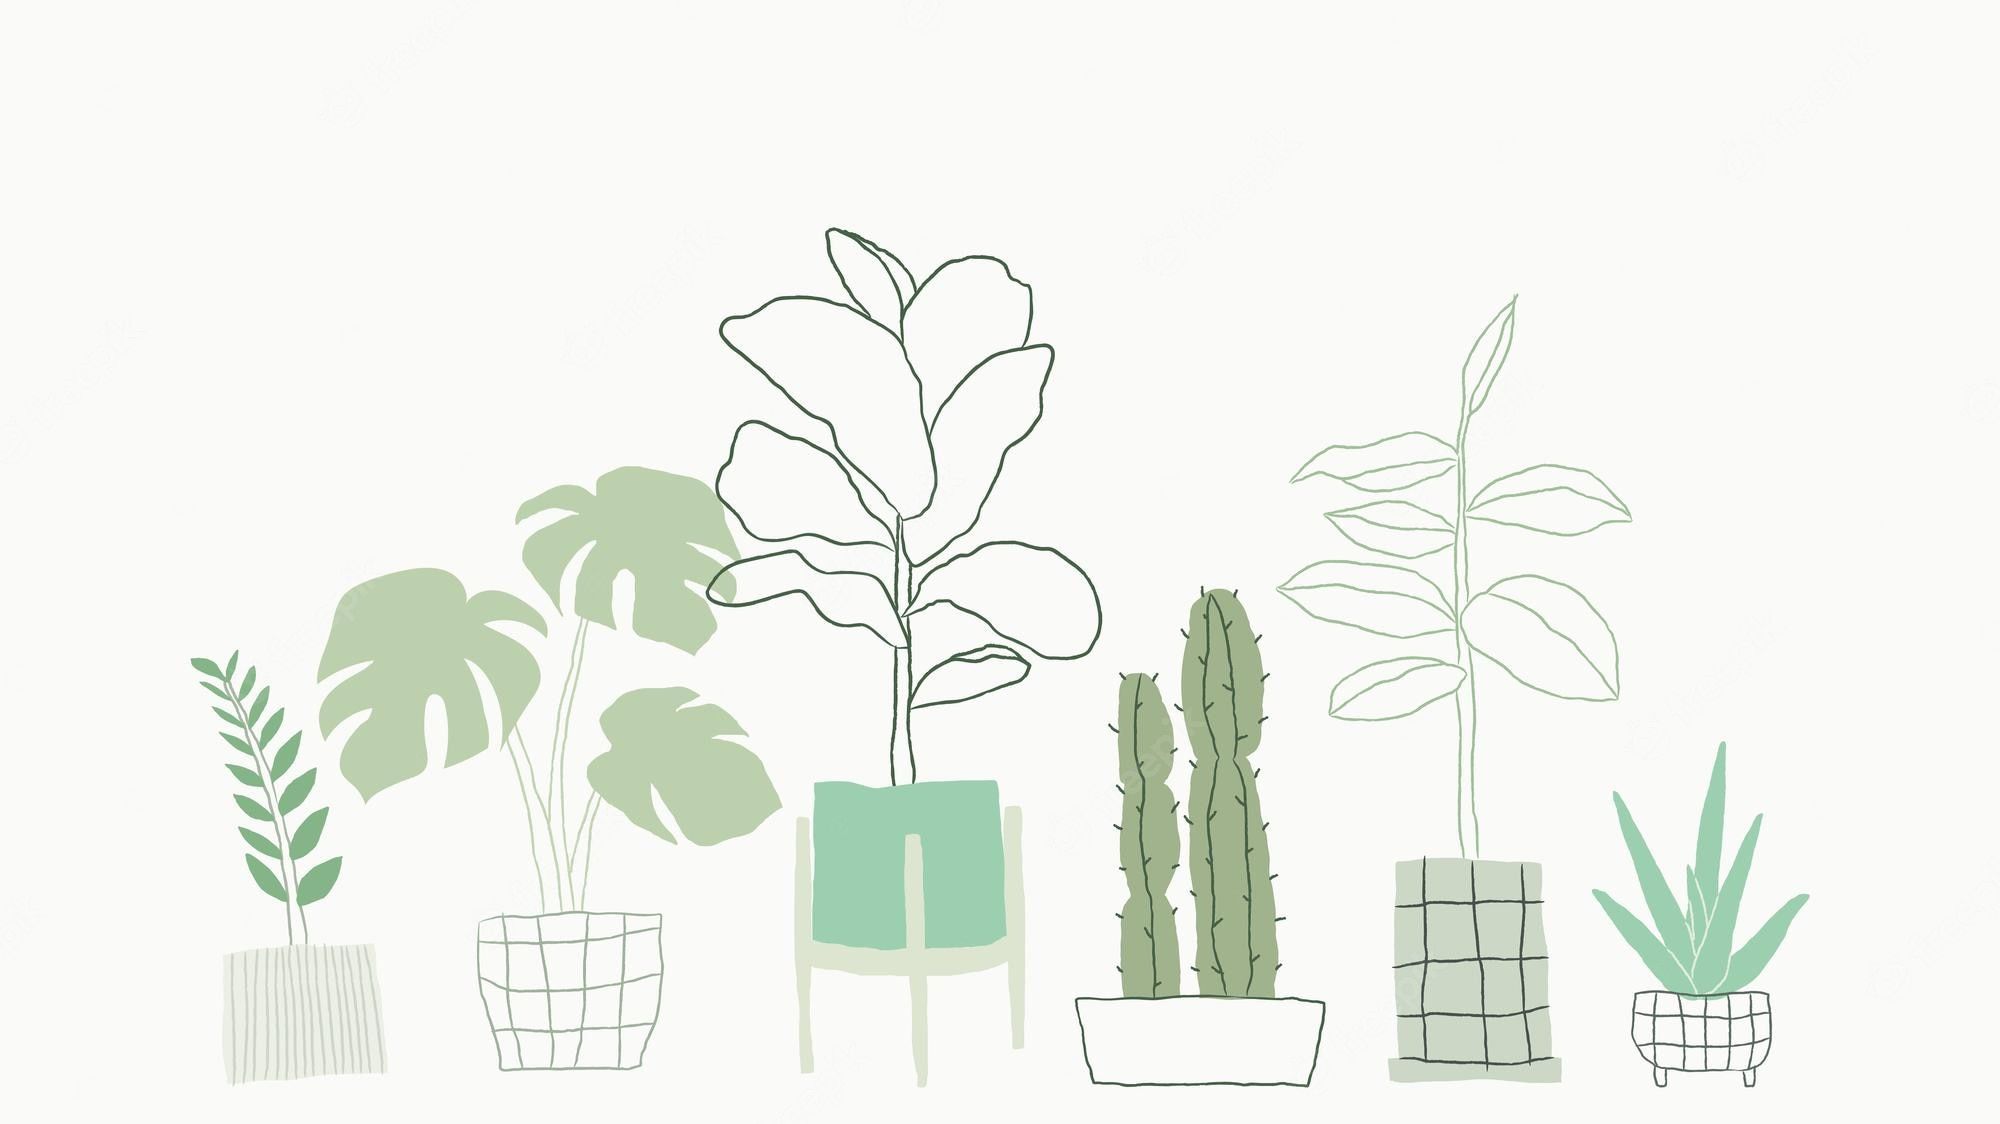 A drawing of several plants in pots - Plants, succulent, simple, doodles, vector